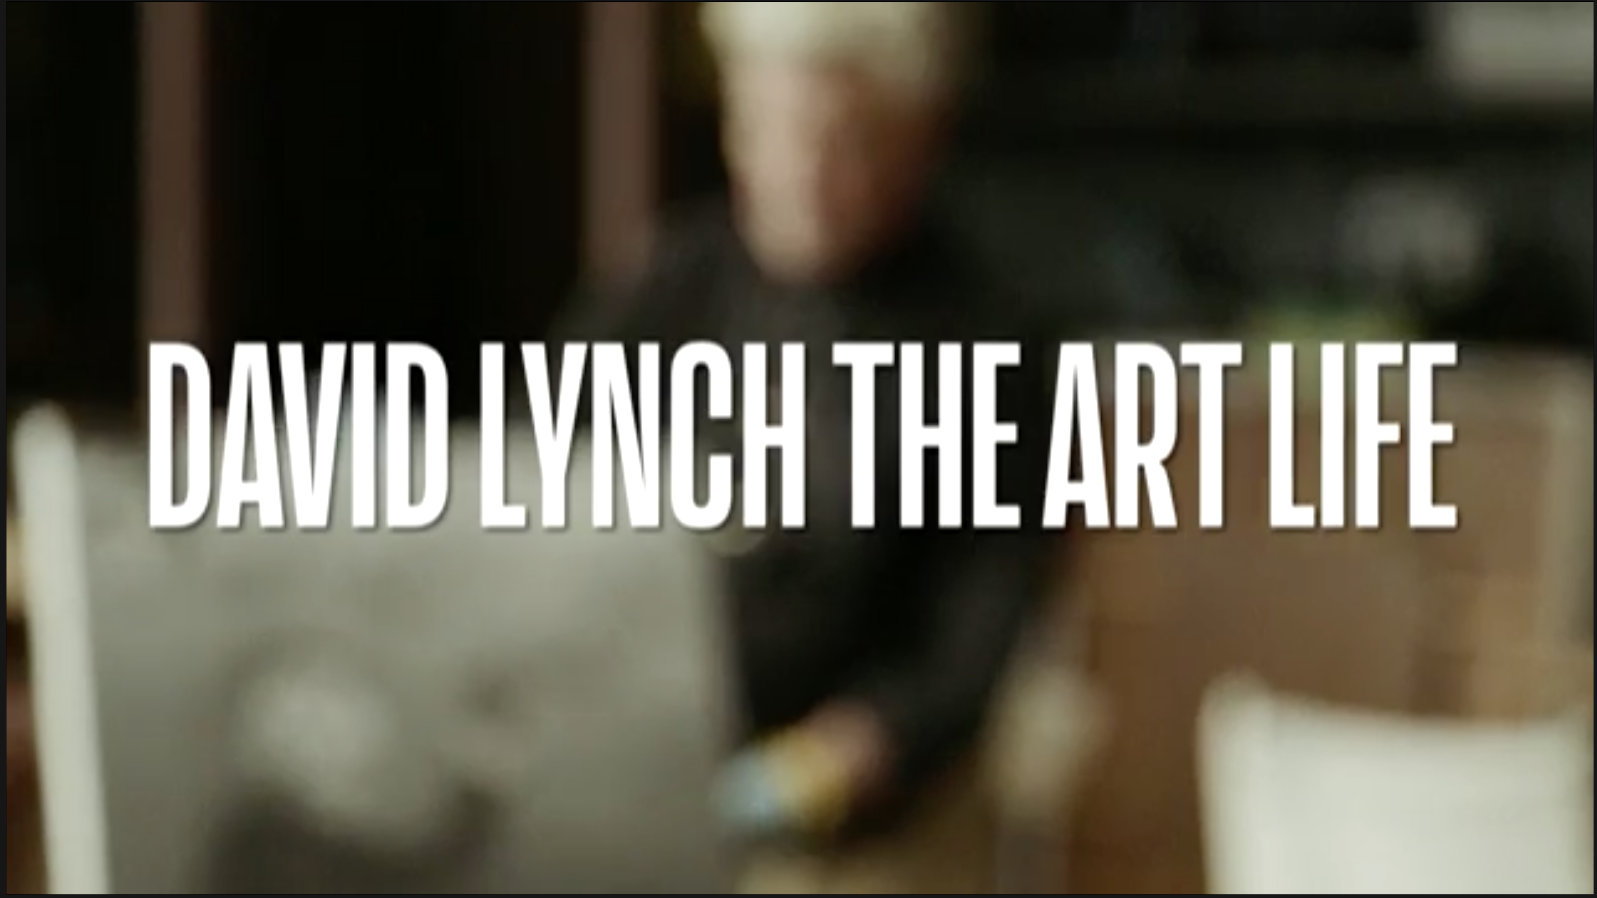 A still from a documentary by Jon Nguyen about David Lynch. The title says "David Lynch The art Life", and it is set in Action Condensed.